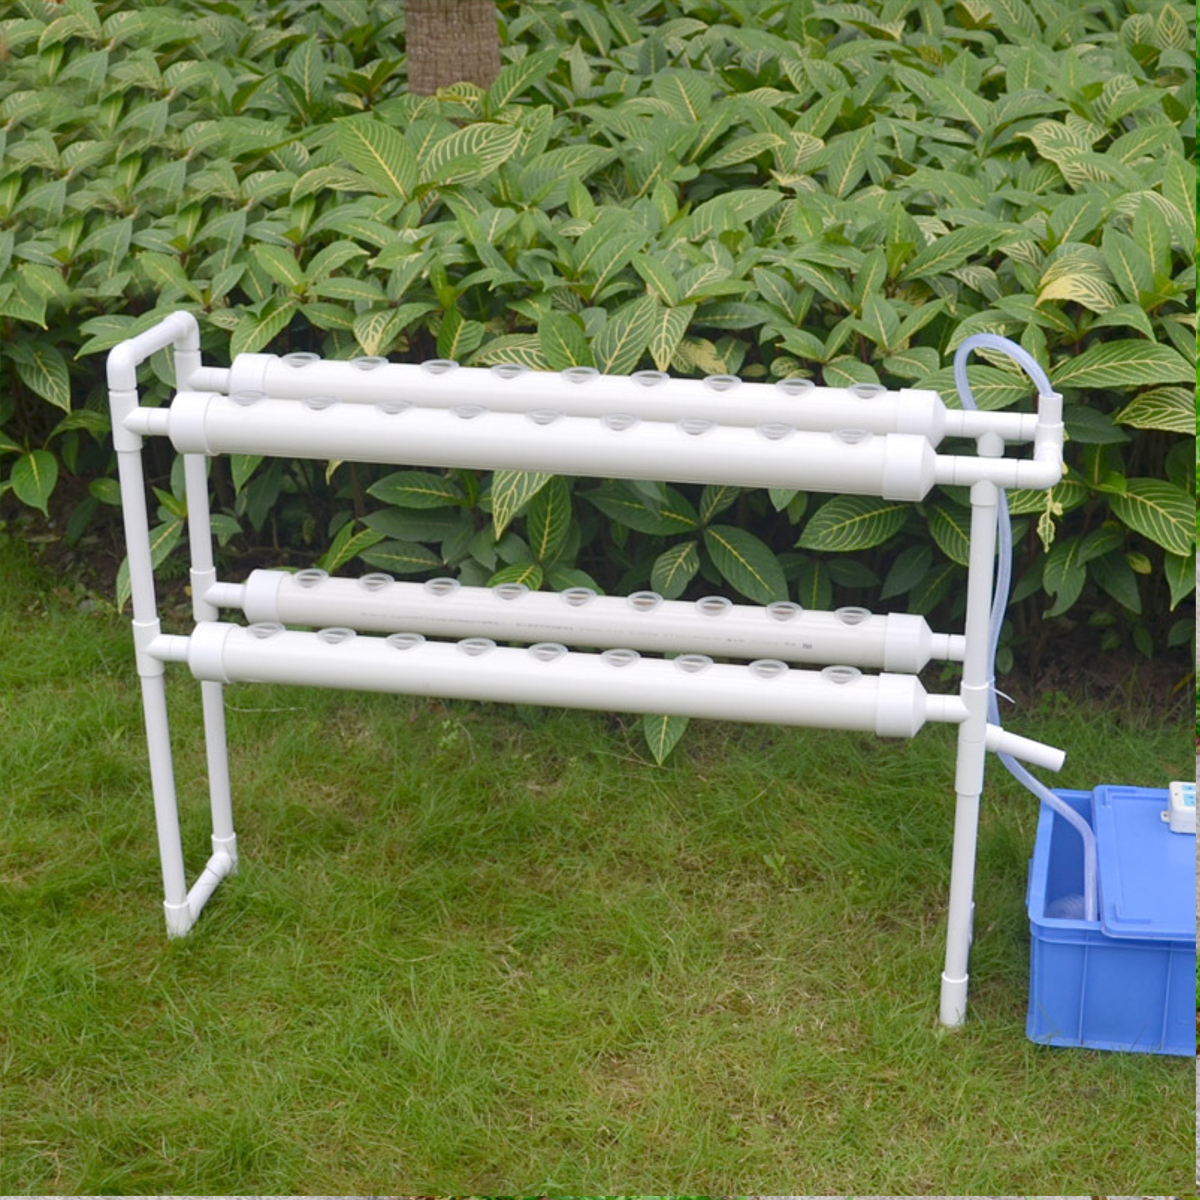 2 Layer 36 Sites Hydroponic Grow Kit Ebb Flow Deep Water Culture Growing DWC Planting Garden Vegetable System 18